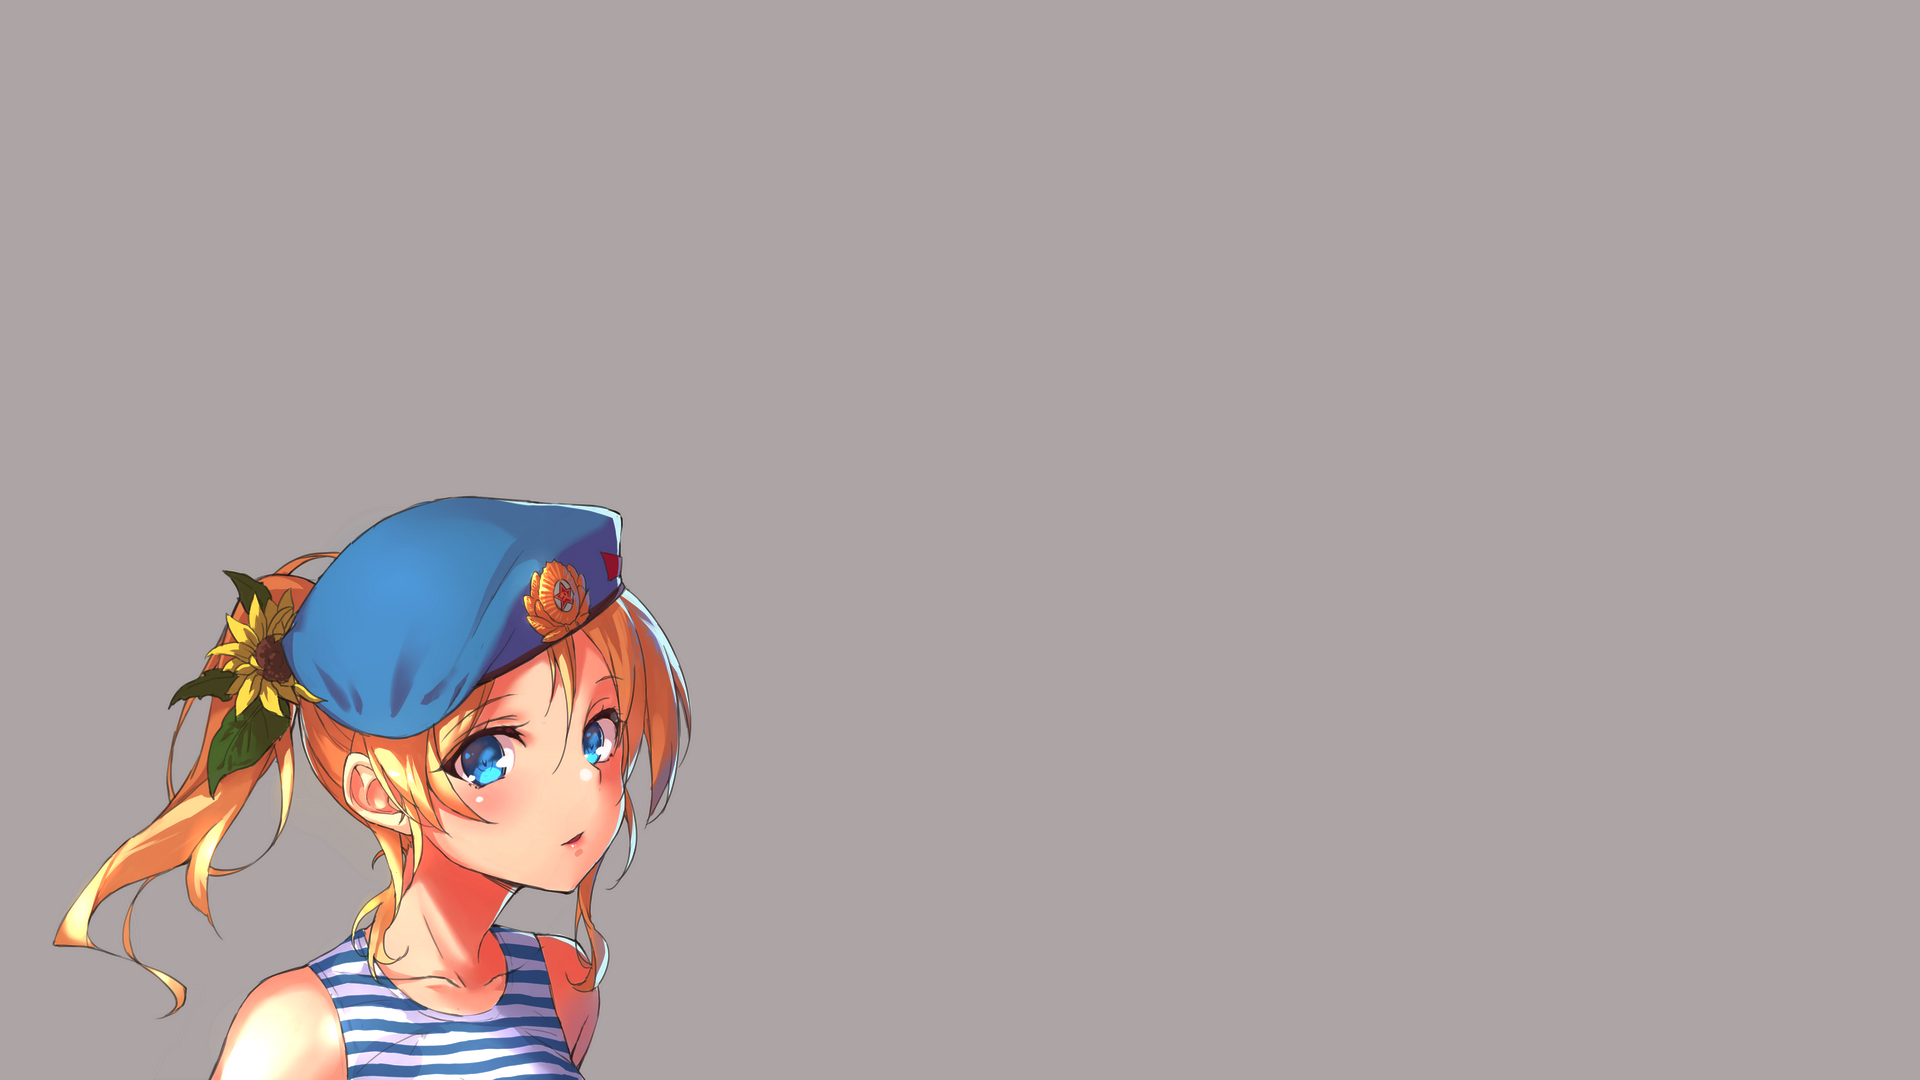 Anime 1920x1080 anime anime girls simple background Love Live! Ayase Eli berets ponytail tank top blue eyes hair ornament gray background Russia military flower in hair women with hats